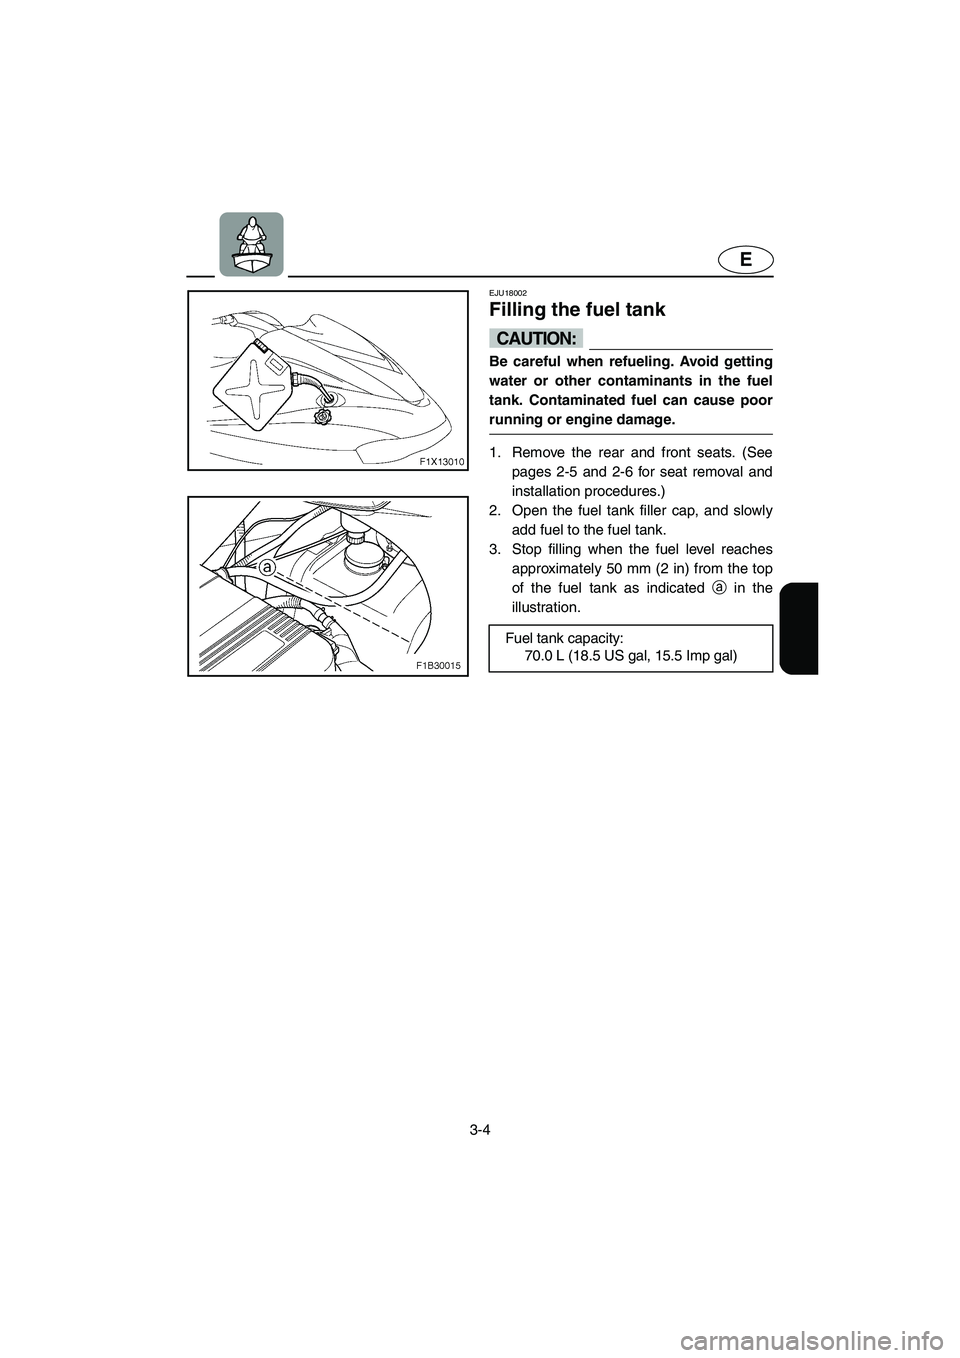 YAMAHA FX HO 2006  Owners Manual 3-4
E
EJU18002
Filling the fuel tank 
CAUTION:@ Be careful when refueling. Avoid getting
water or other contaminants in the fuel
tank. Contaminated fuel can cause poor
running or engine damage. 
@
1. 